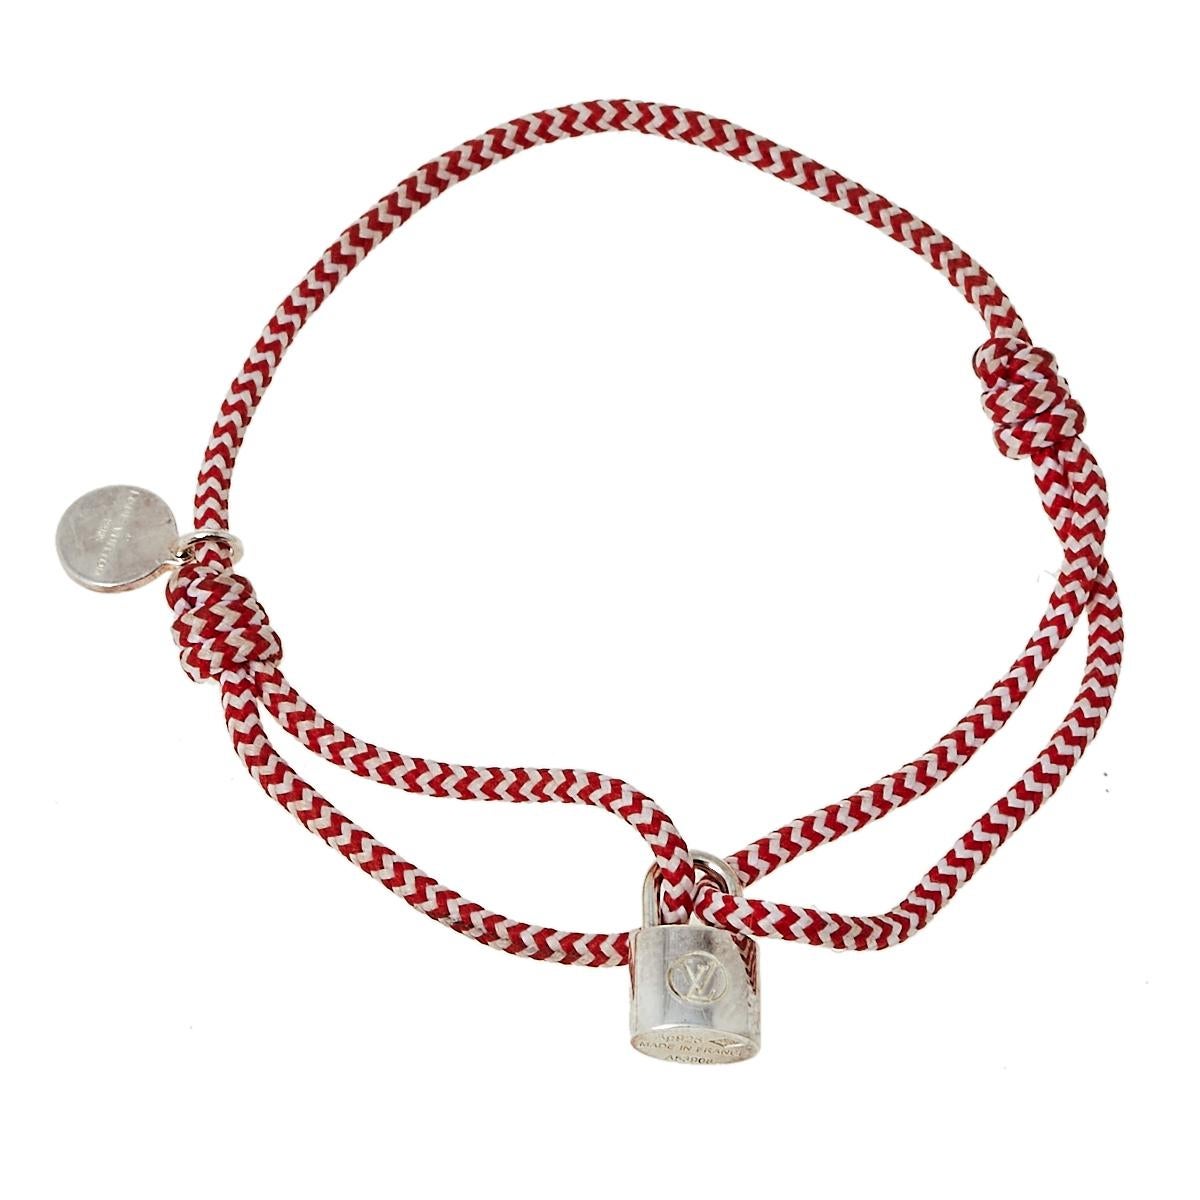 This Louis Vuitton for UNICEF collection is a beautiful celebration of childhood. This bracelet from the line has a cord that holds the LV logo engraved padlock smoothly sculpted from sterling silver.

Includes: Original Dustbag, Info Booklets